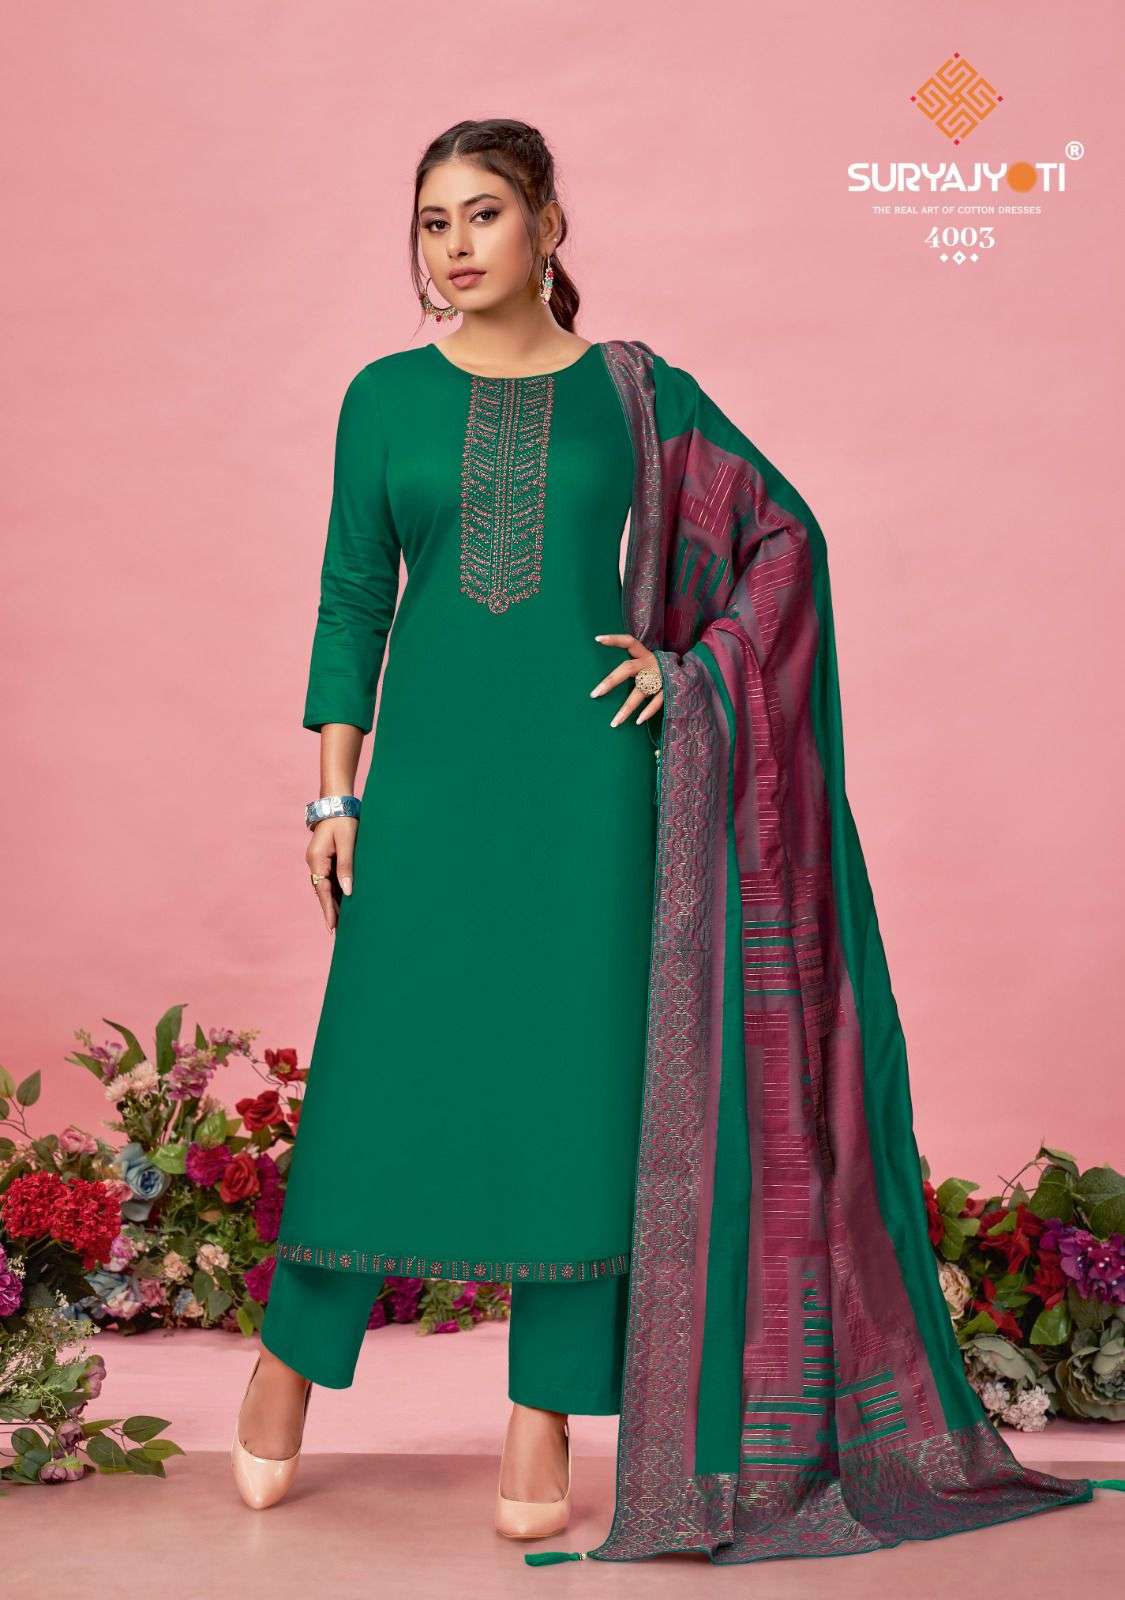  Suryajyoti Naadirah Vol-4 Pure Jaam Satin Cotton With Neck And Border Embroidery Work On Wholesale